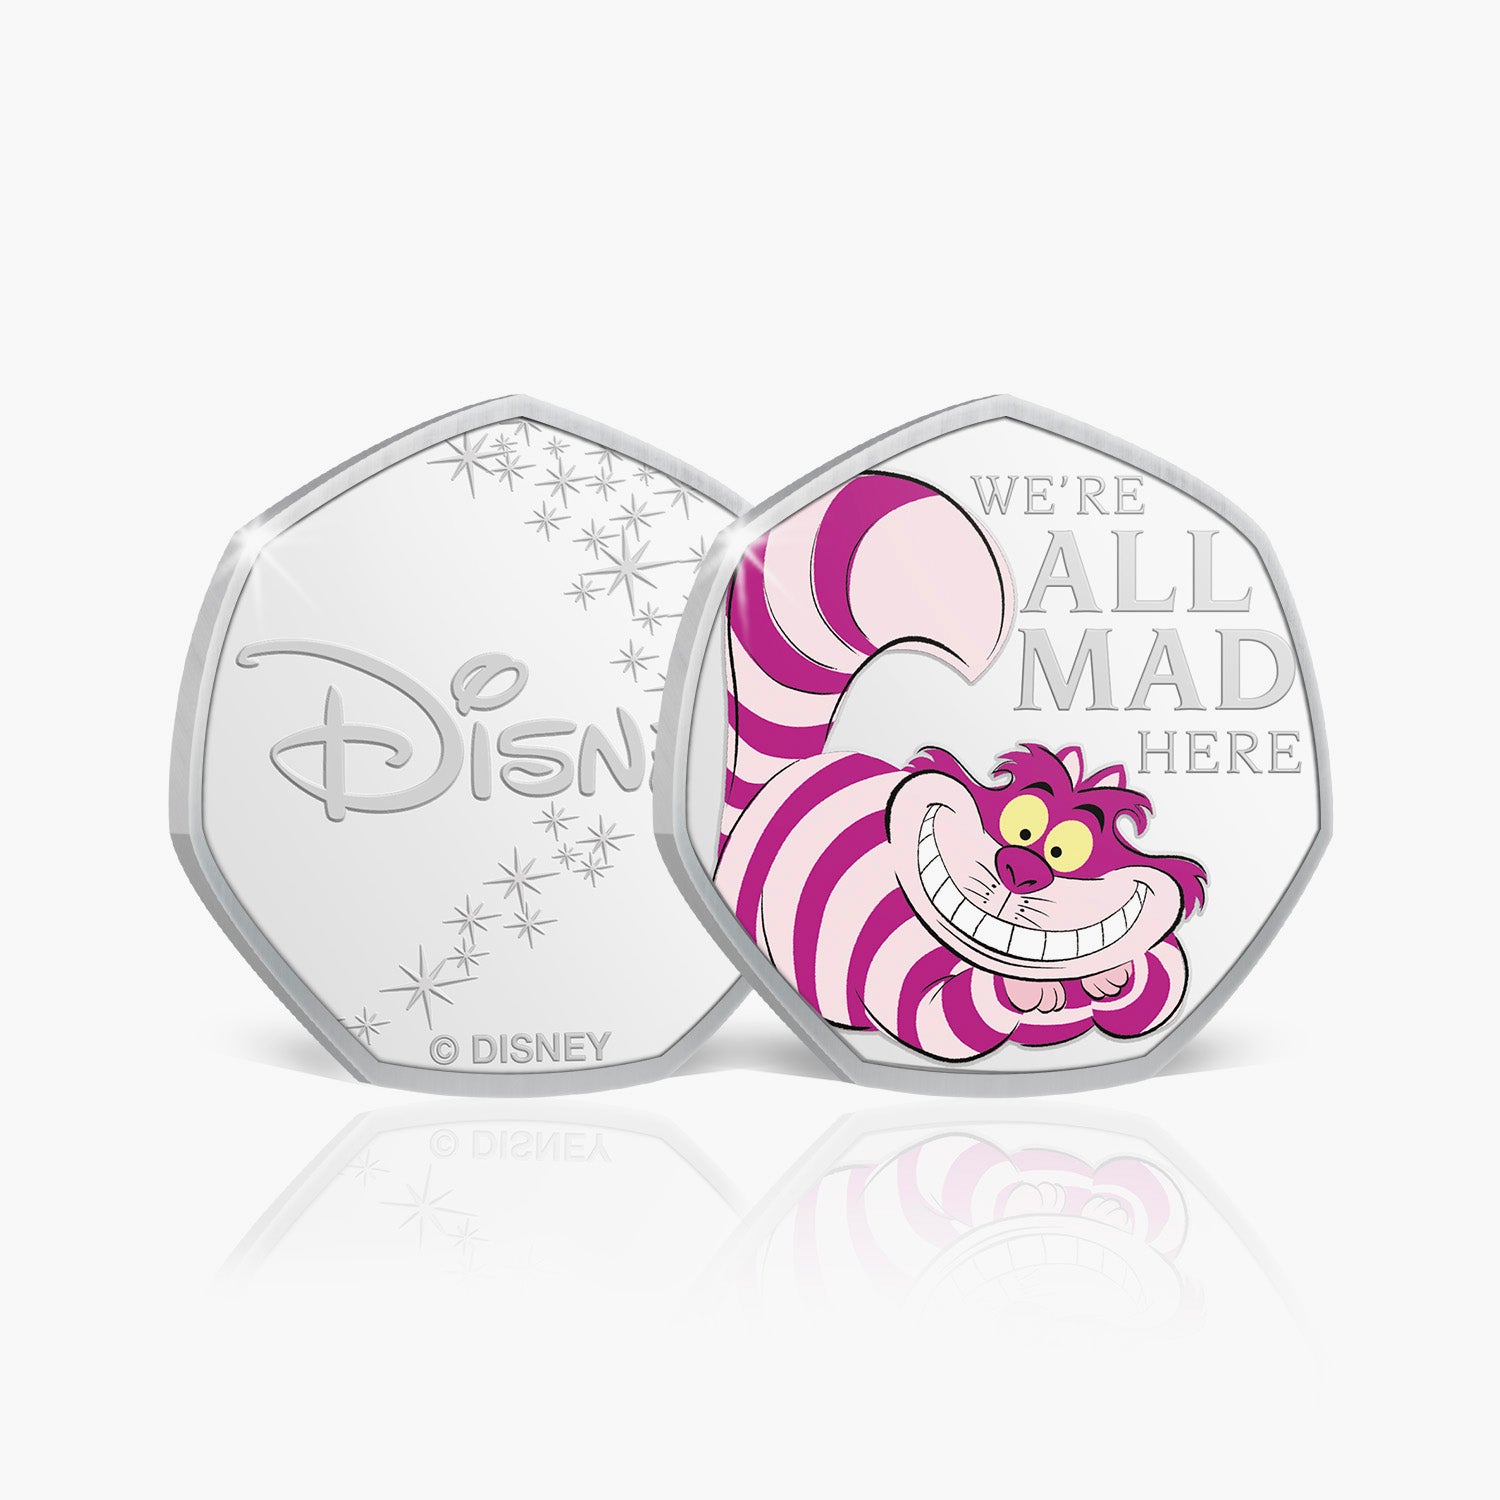 Cheshire Cat Silver Plated Commemorative